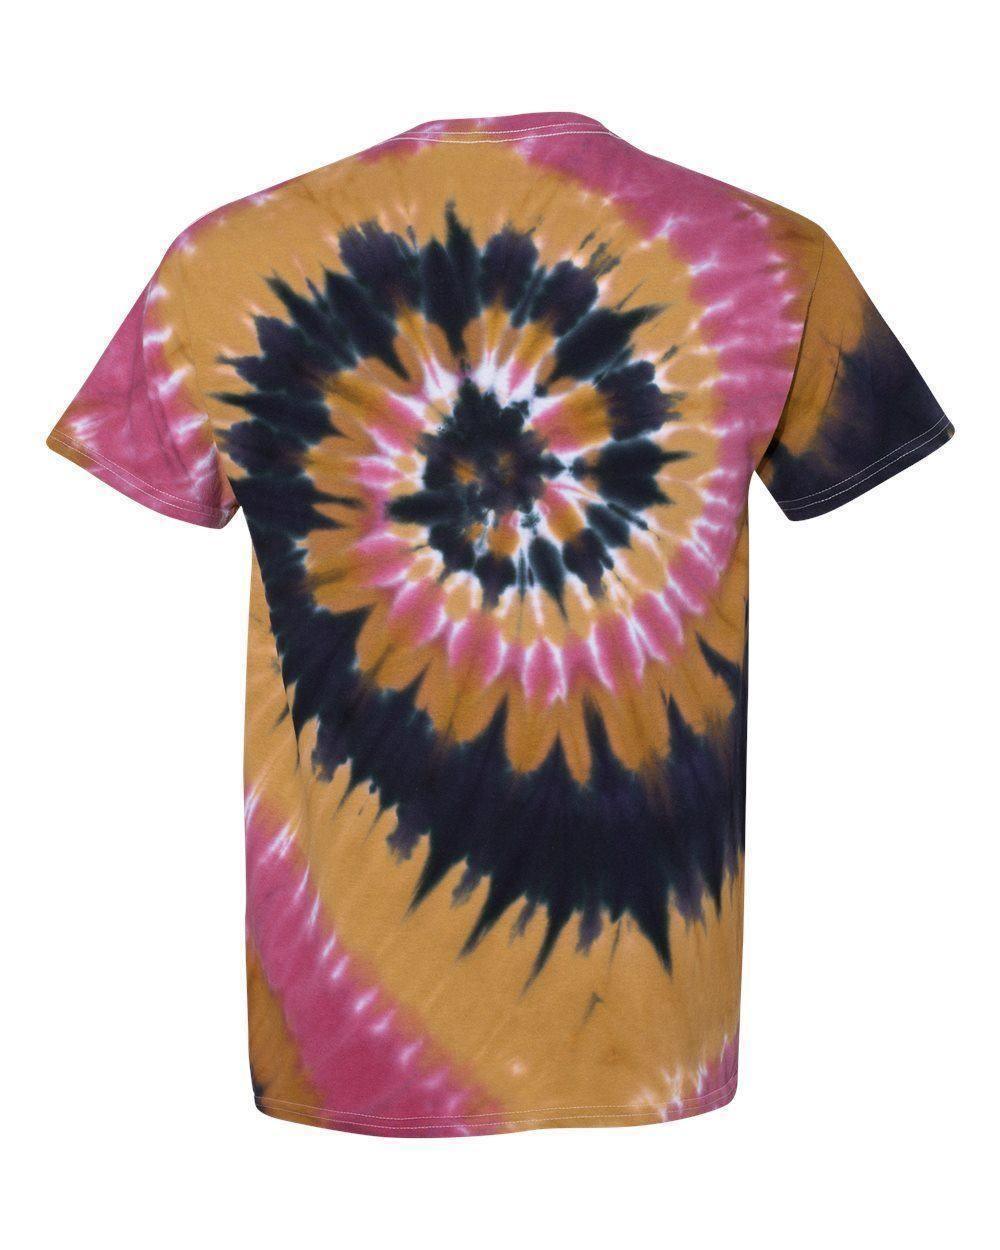 Tuscan Tie Dye T-Shirt - Constantly Create Shop